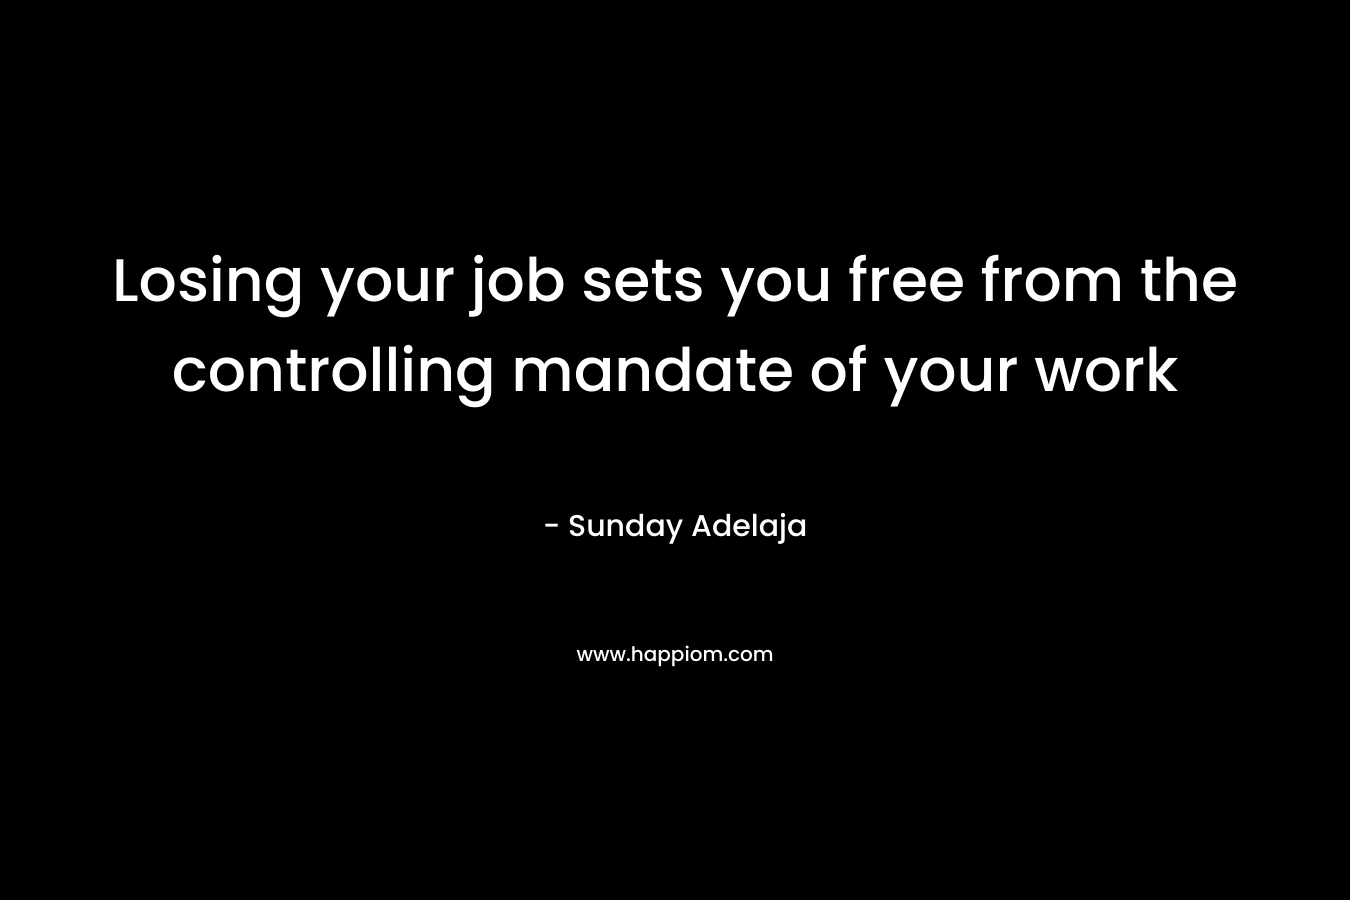 Losing your job sets you free from the controlling mandate of your work